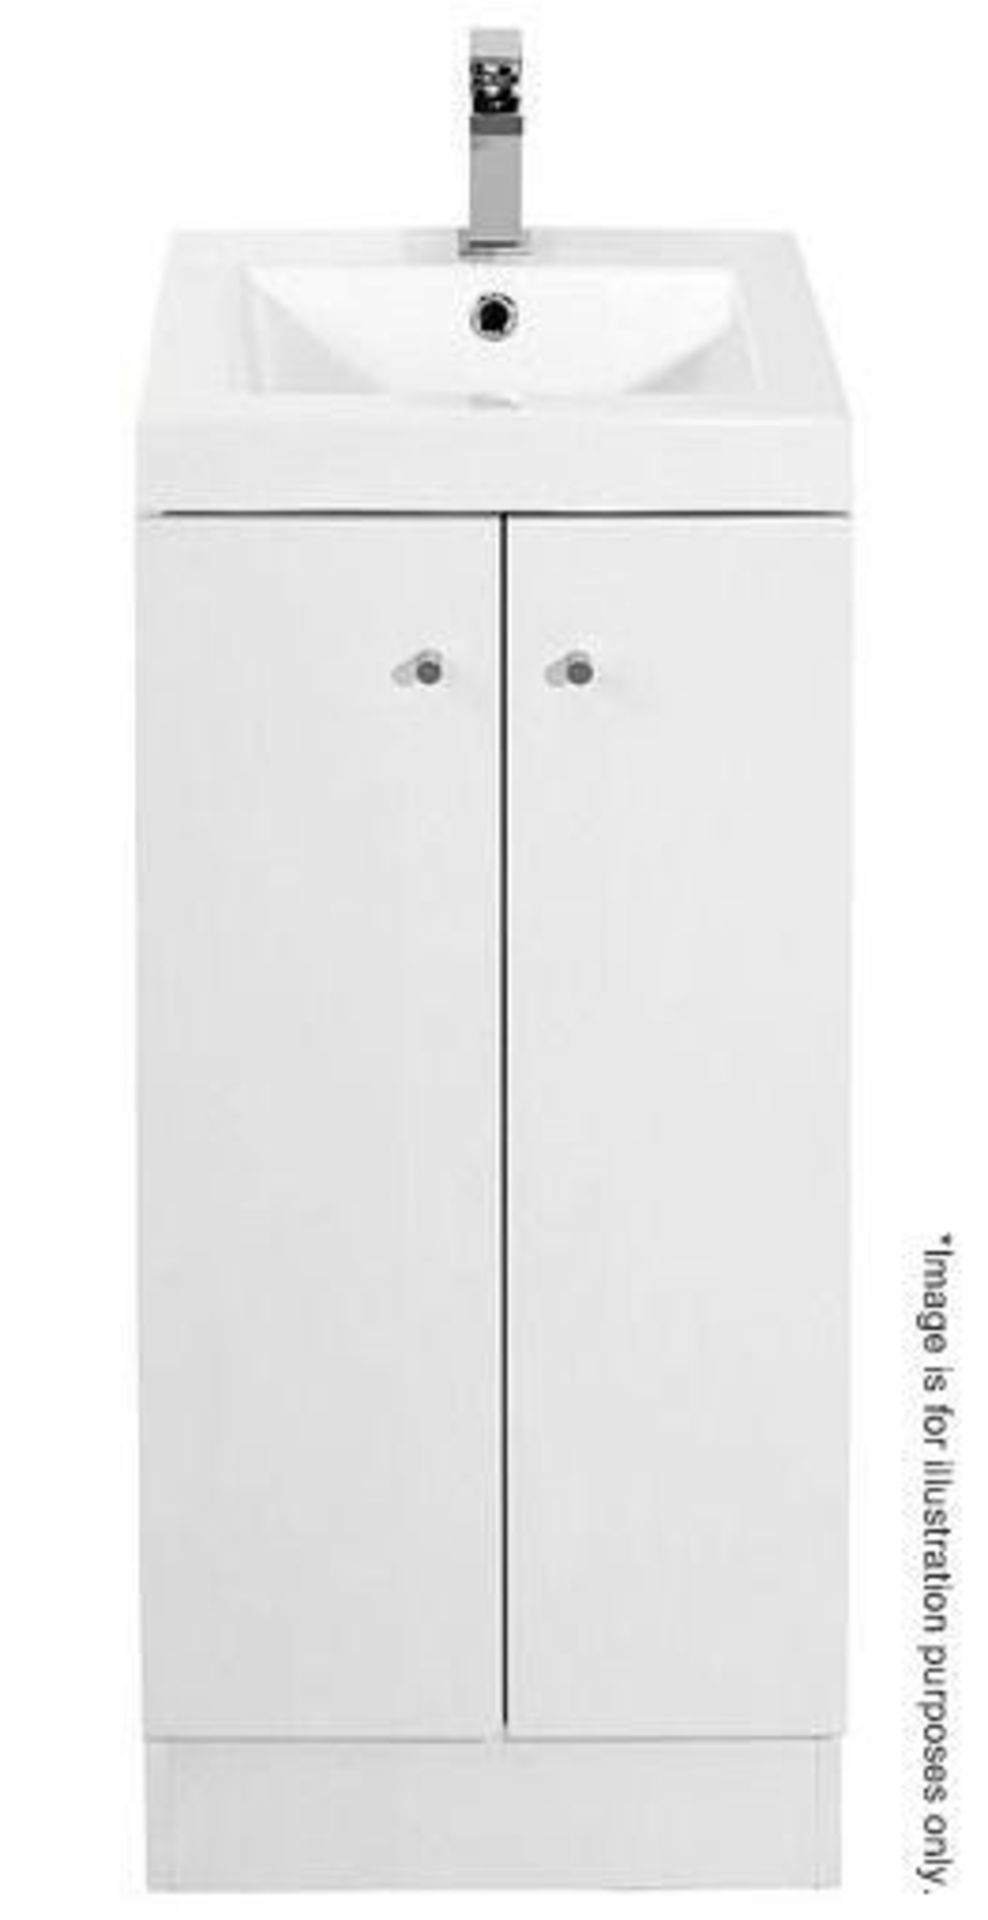 5 x Alpine Duo 400 Floorstanding Vanity Units In Gloss White - Brand New Boxed Stock - Dimensions: H - Image 2 of 3